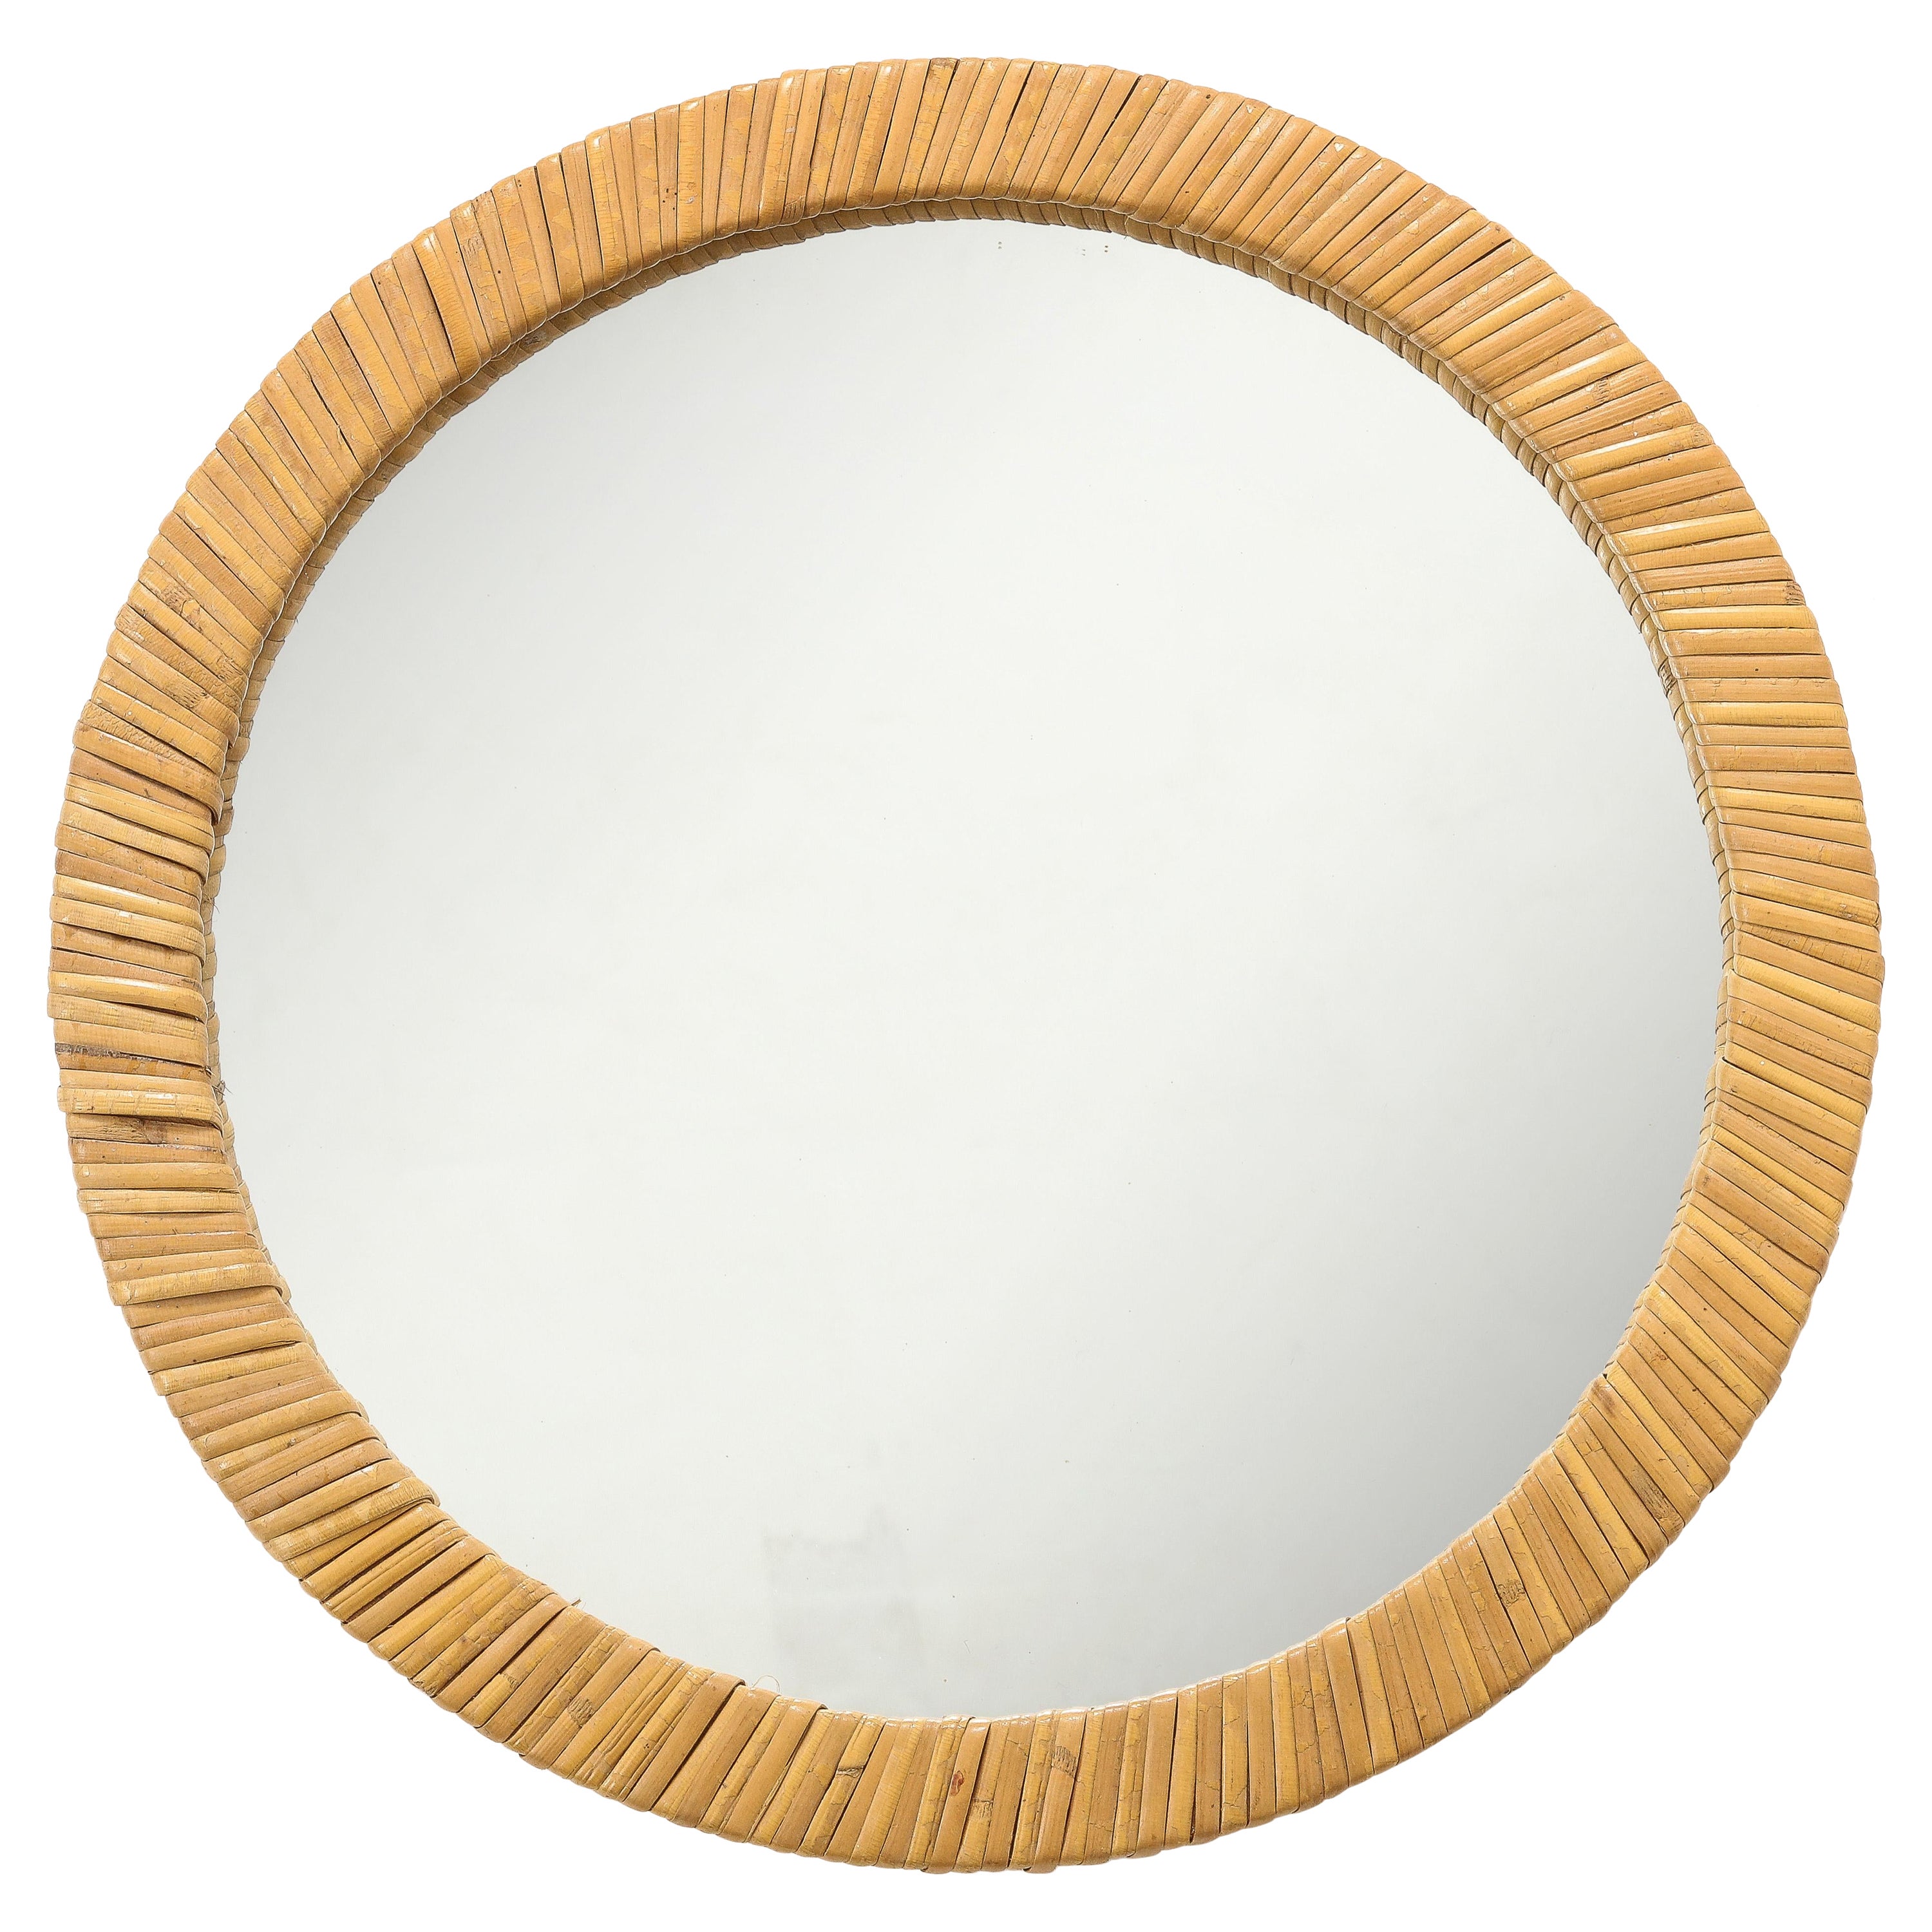 Petite "Canne d'Inde" Round Rattan Mirror - Italy 1960's For Sale